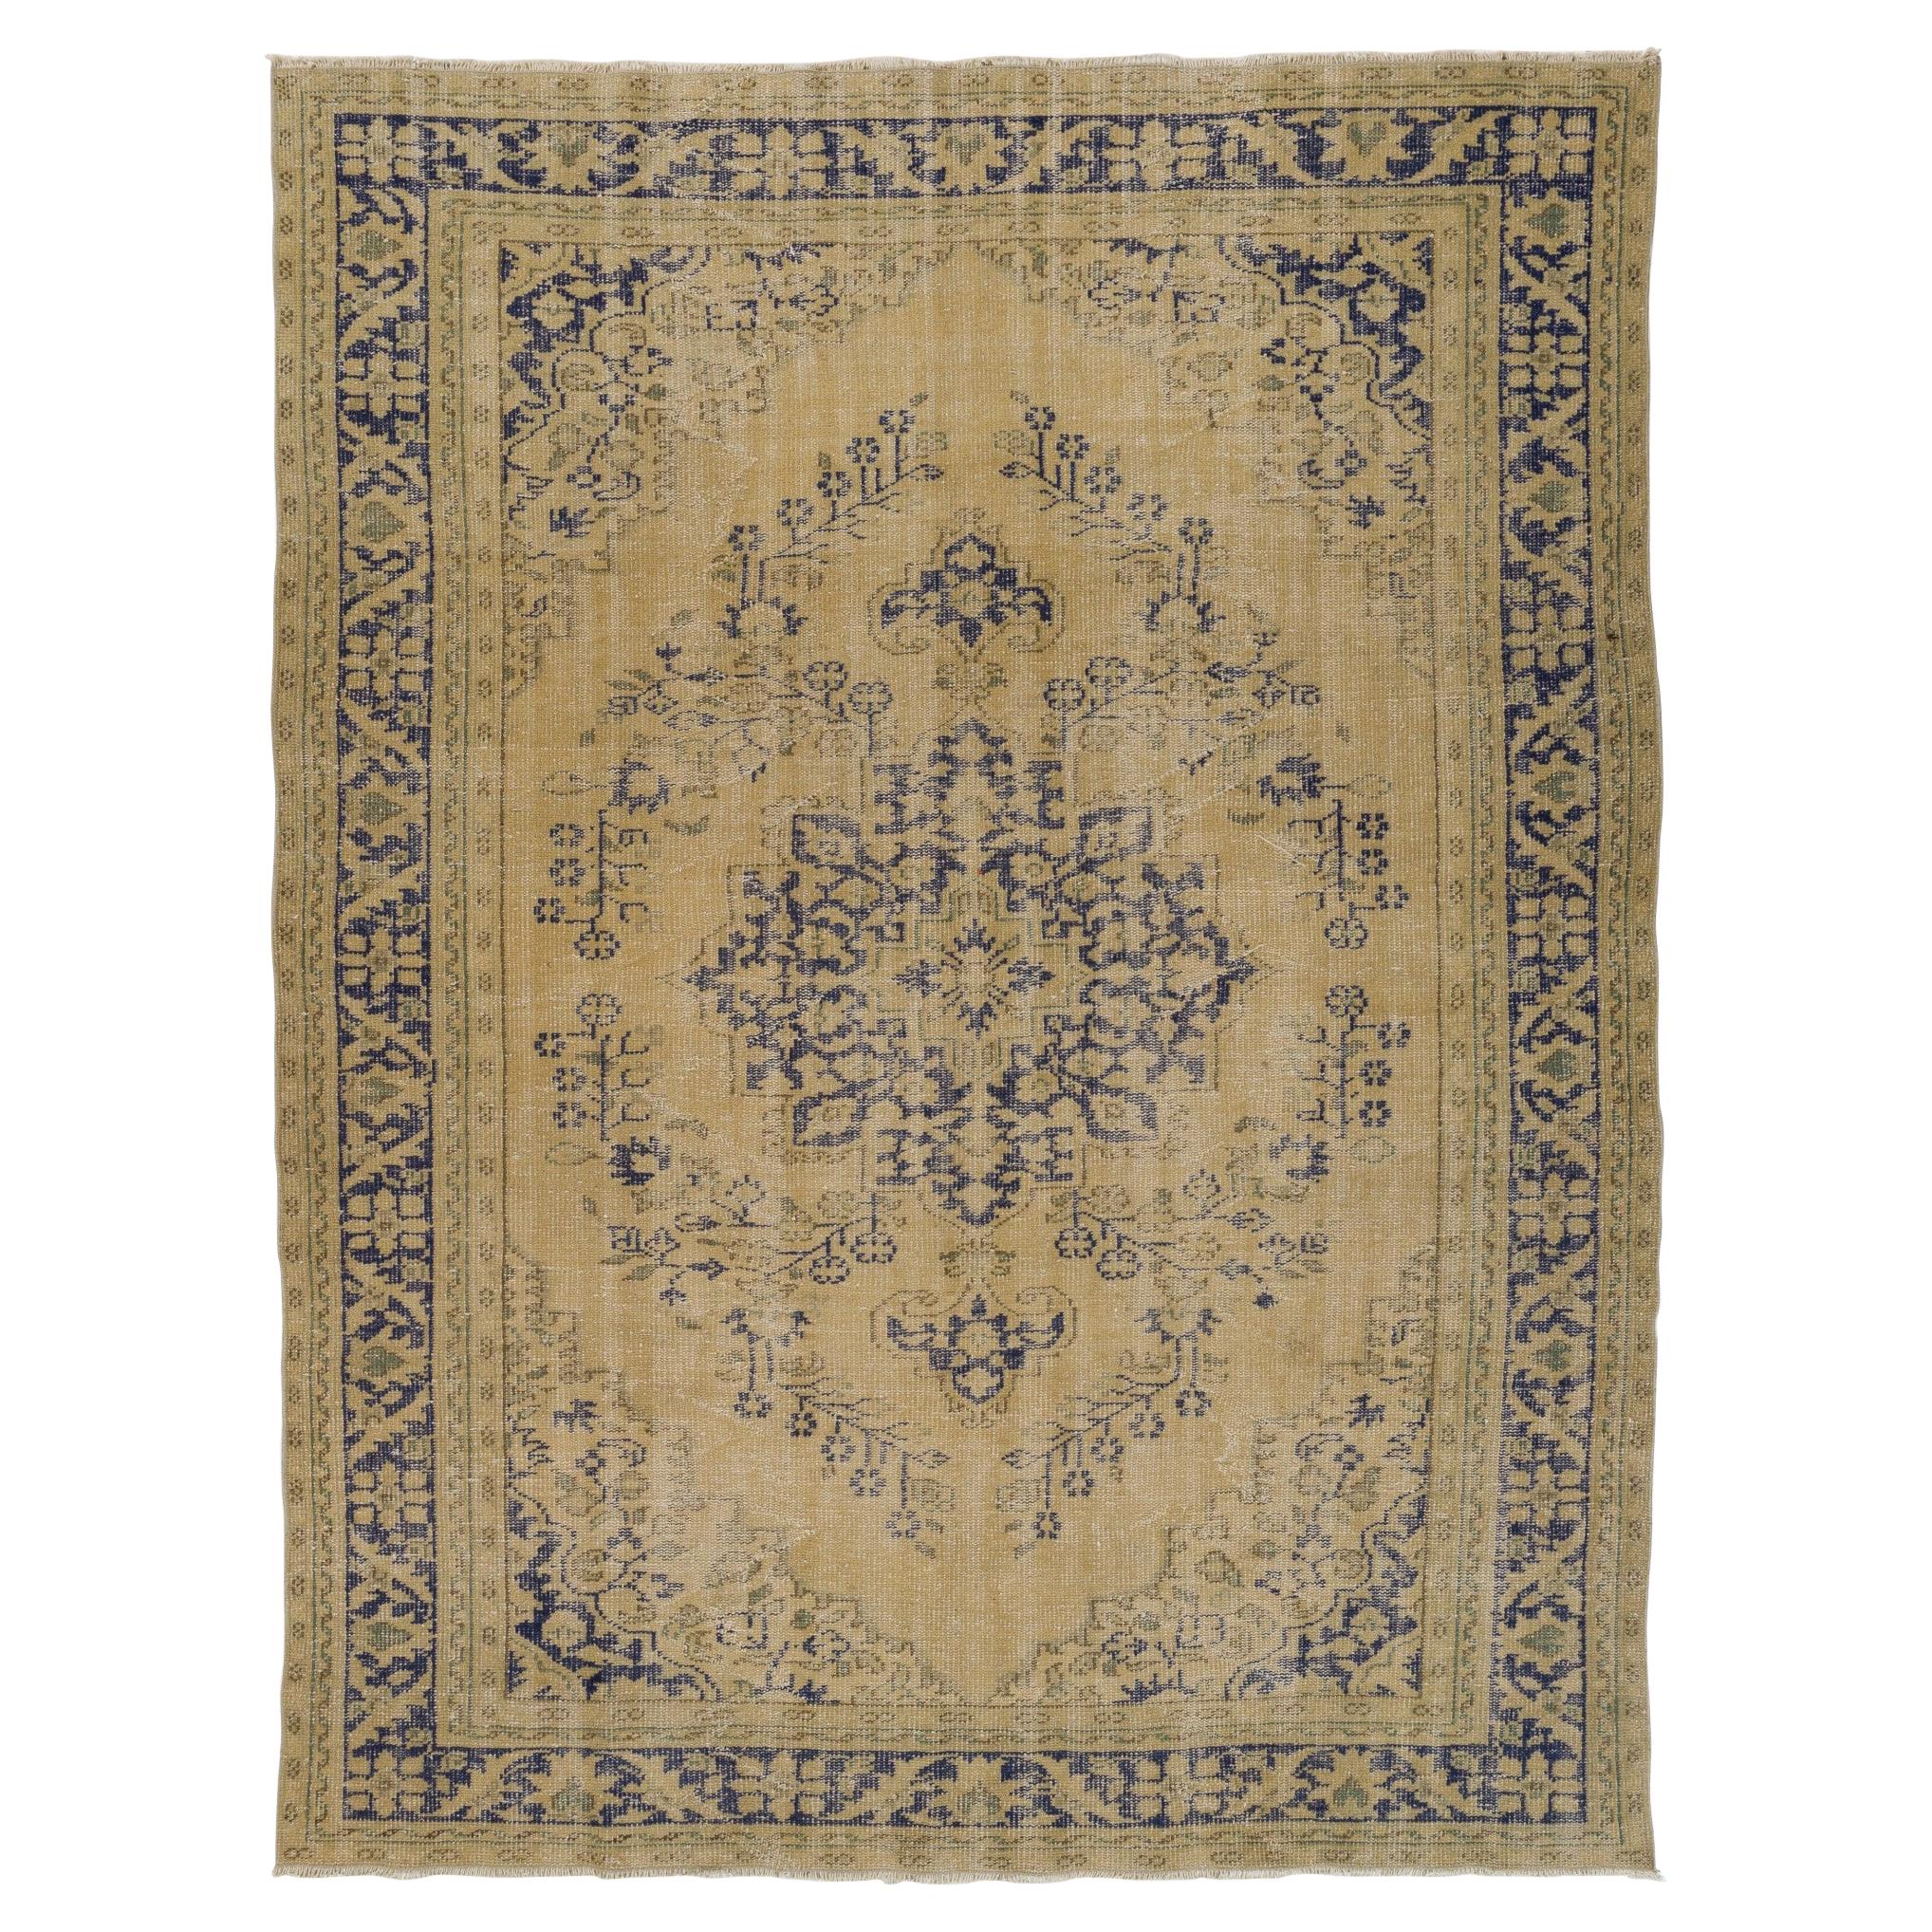 7.3x9.5 Ft Vintage Turkish Oushak Area Rug in Beige and Navy Blue colors. 